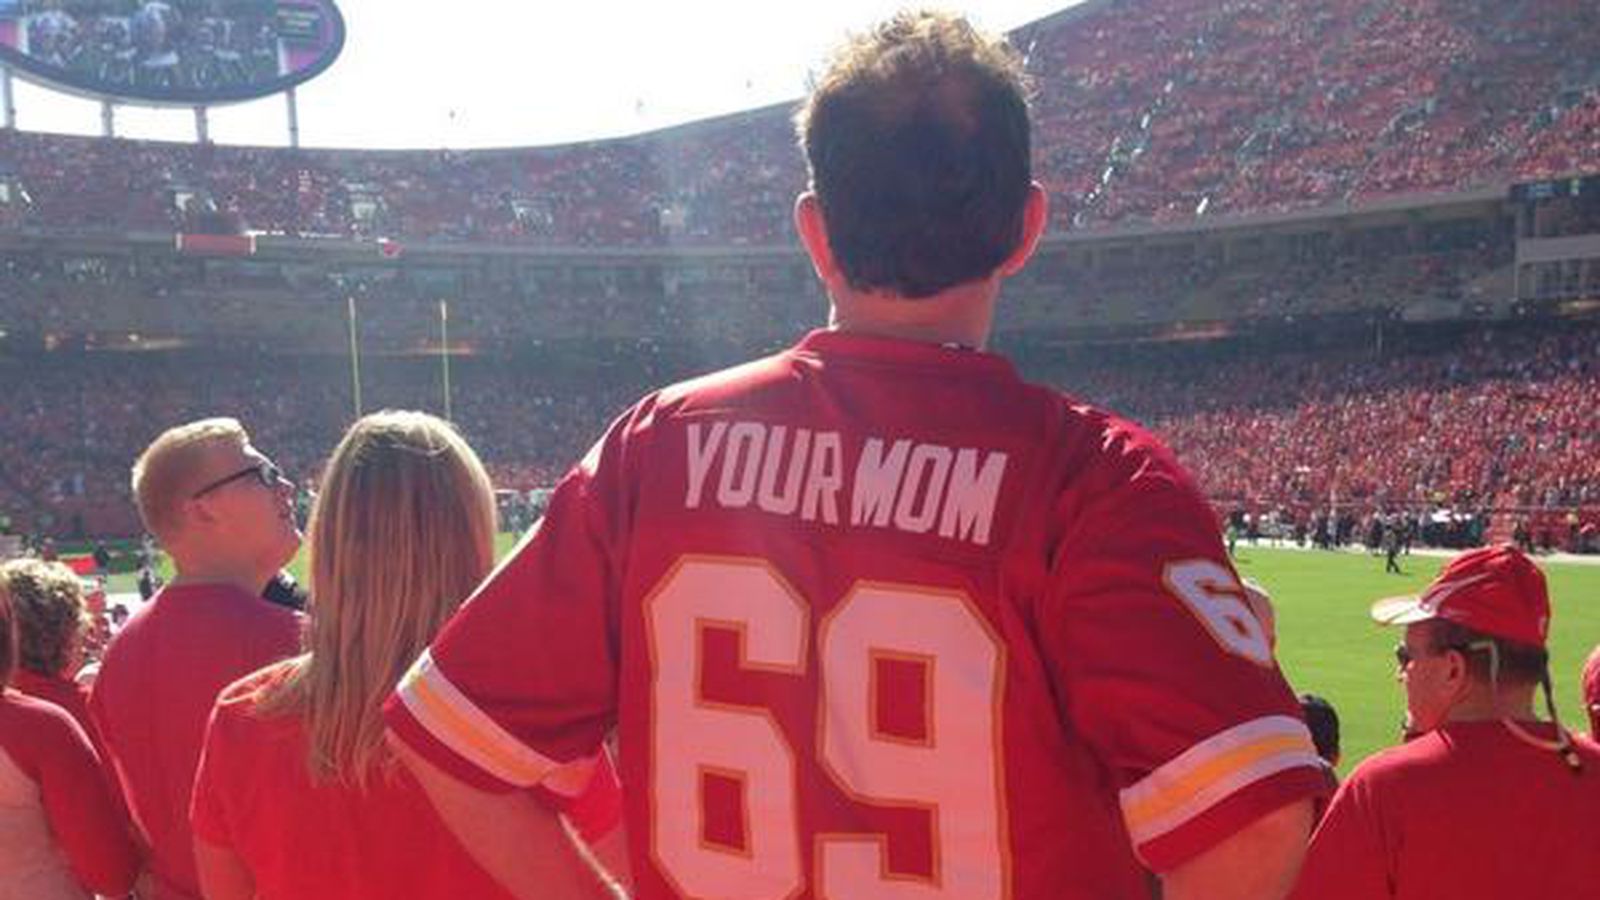 Here's a Chiefs fan in a 69 YOUR MOM jersey - SBNation.com